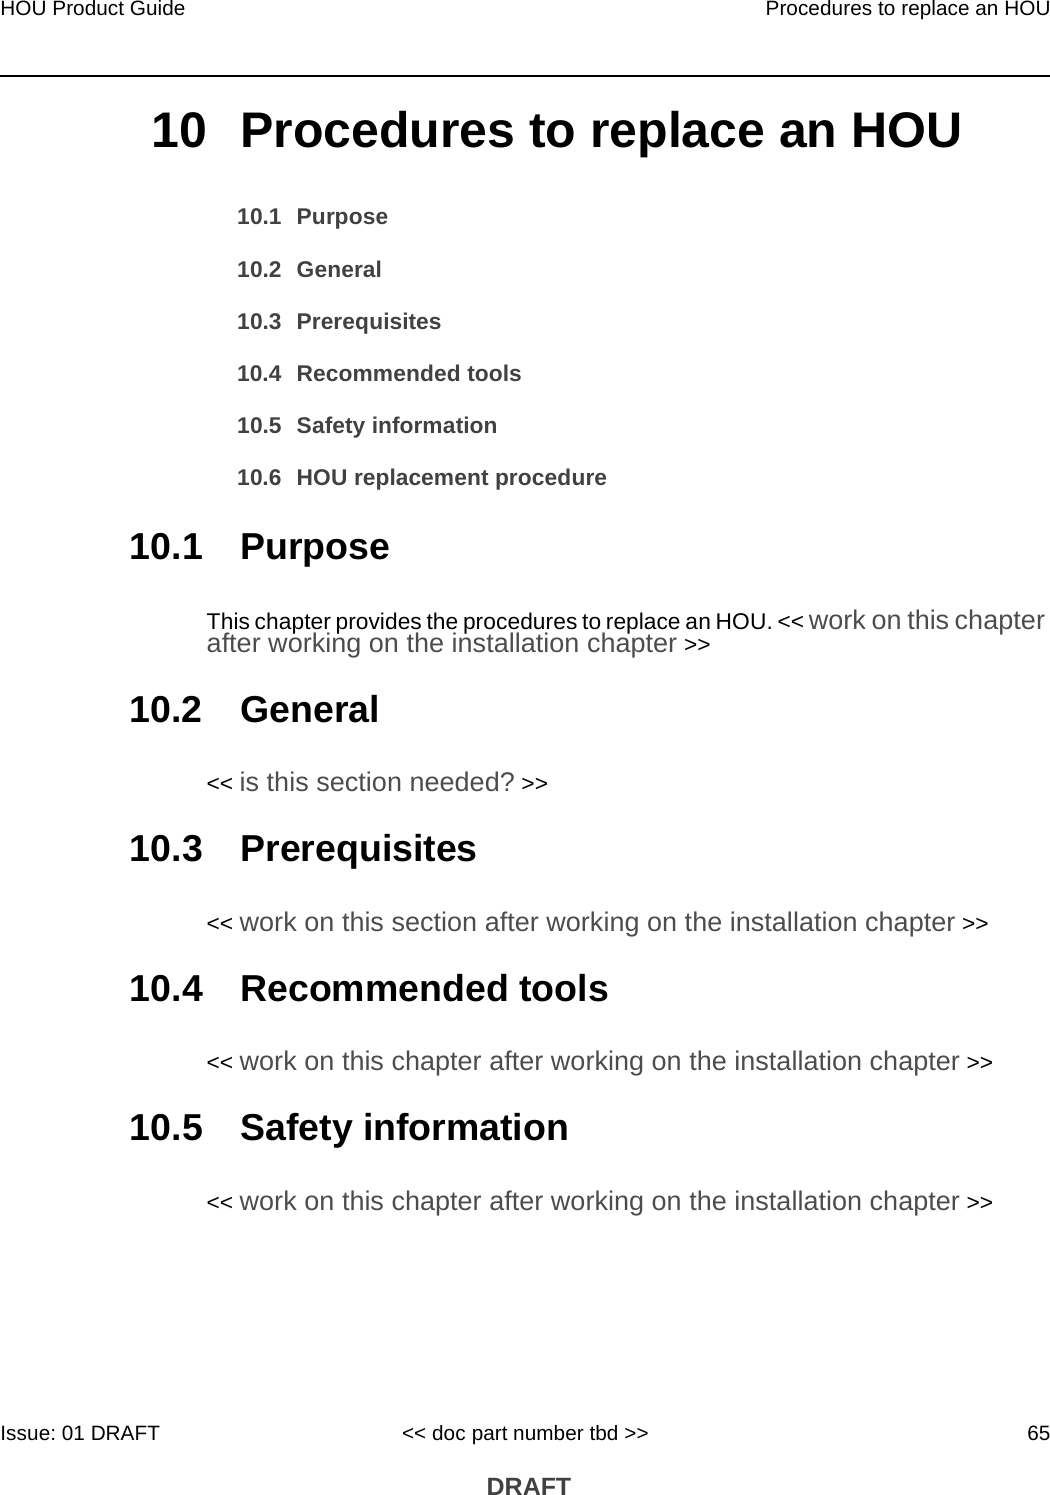 HOU Product Guide Procedures to replace an HOUIssue: 01 DRAFT &lt;&lt; doc part number tbd &gt;&gt; 65 DRAFT10 Procedures to replace an HOU10.1 Purpose10.2 General10.3 Prerequisites10.4 Recommended tools10.5 Safety information10.6 HOU replacement procedure10.1 PurposeThis chapter provides the procedures to replace an HOU. &lt;&lt; work on this chapter after working on the installation chapter &gt;&gt; 10.2 General&lt;&lt; is this section needed? &gt;&gt;10.3 Prerequisites&lt;&lt; work on this section after working on the installation chapter &gt;&gt;10.4 Recommended tools&lt;&lt; work on this chapter after working on the installation chapter &gt;&gt;10.5 Safety information&lt;&lt; work on this chapter after working on the installation chapter &gt;&gt;